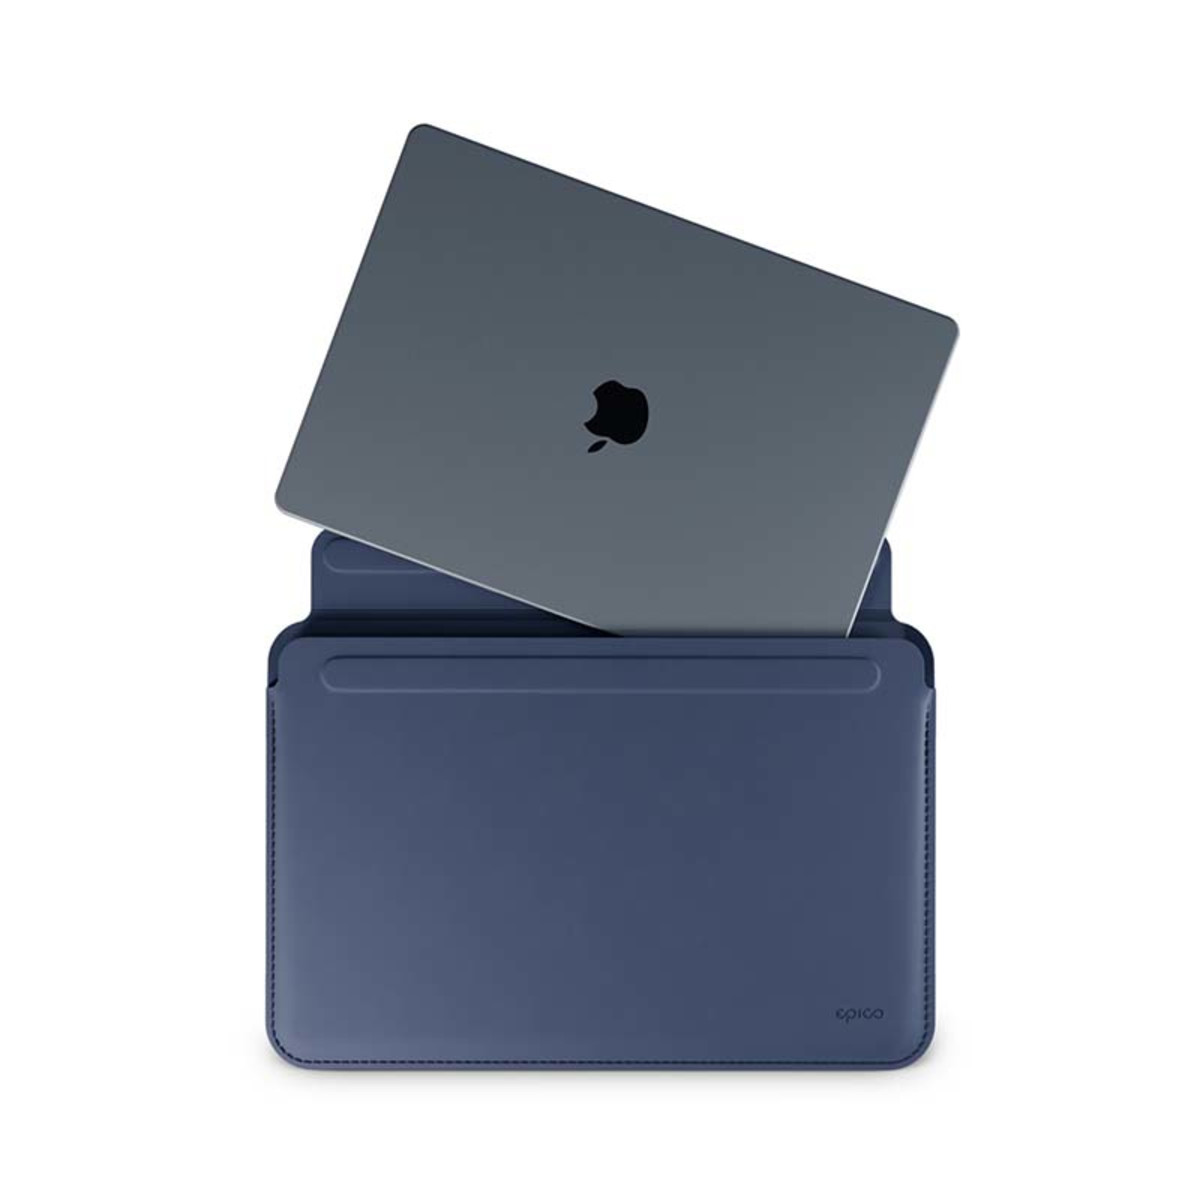 Leather Sleeve For Macbook 13.3 - Blue